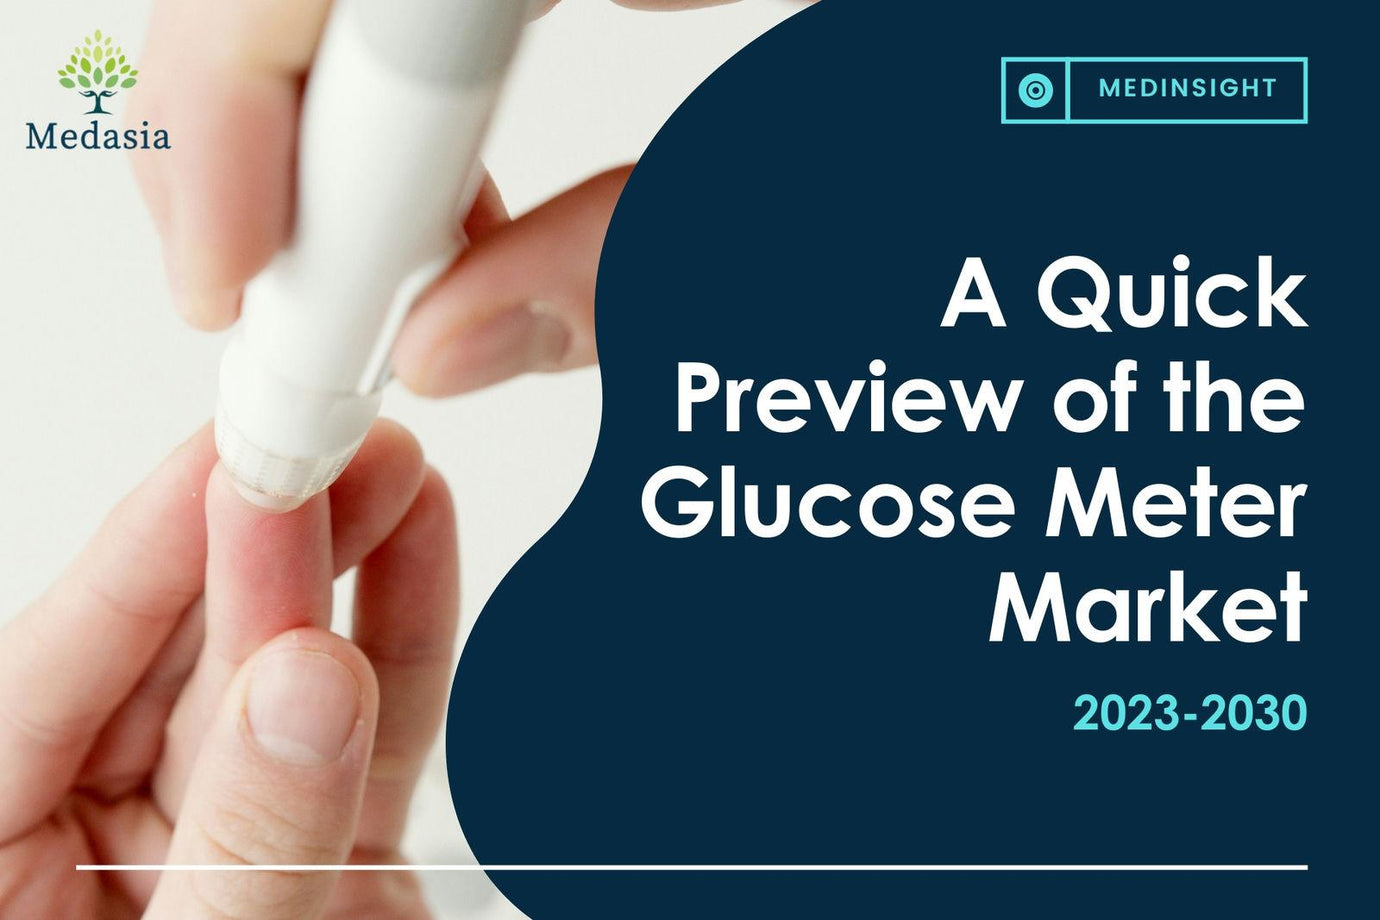 A Quick Preview of the Glucose Meter Market: 2023 - 2030 - Hangzhou MedAsia